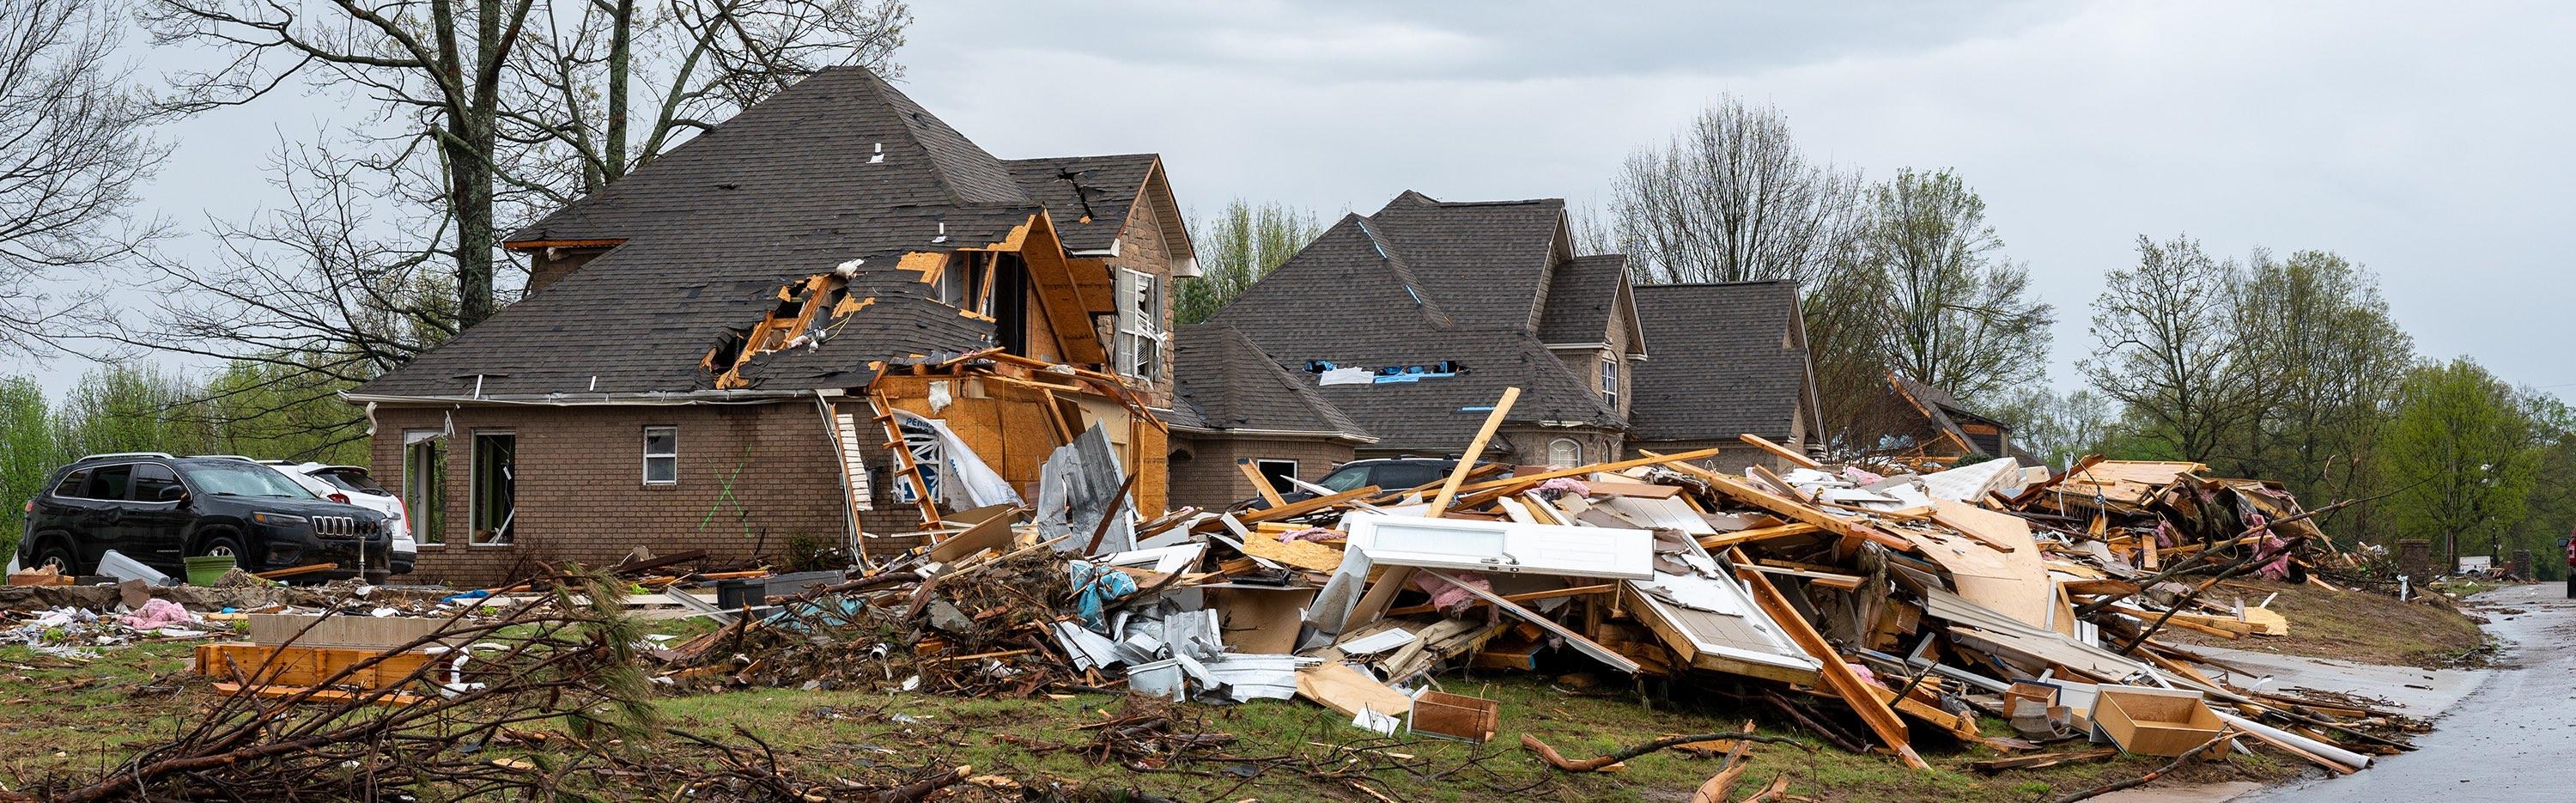 Picture of damaged house due to tornado